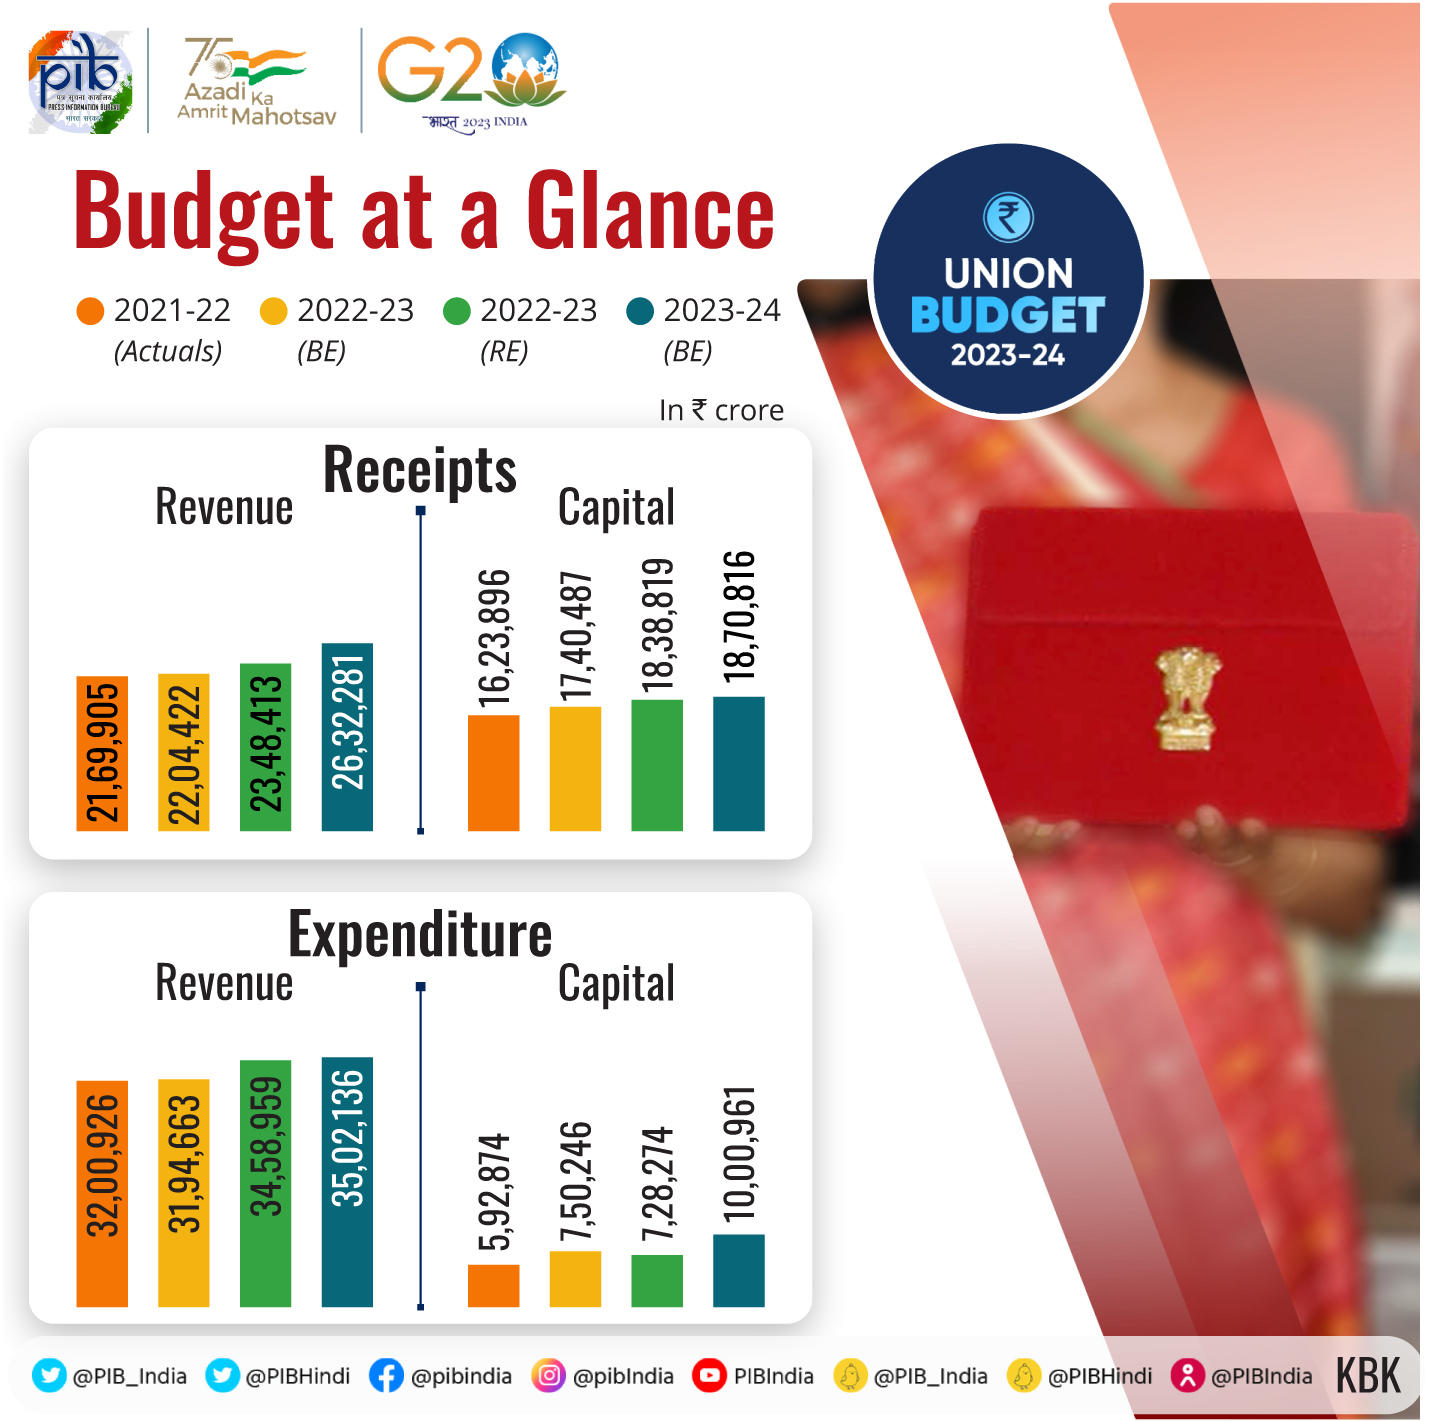 Union Budget 202324 Highlights & Complete Budget Analysis